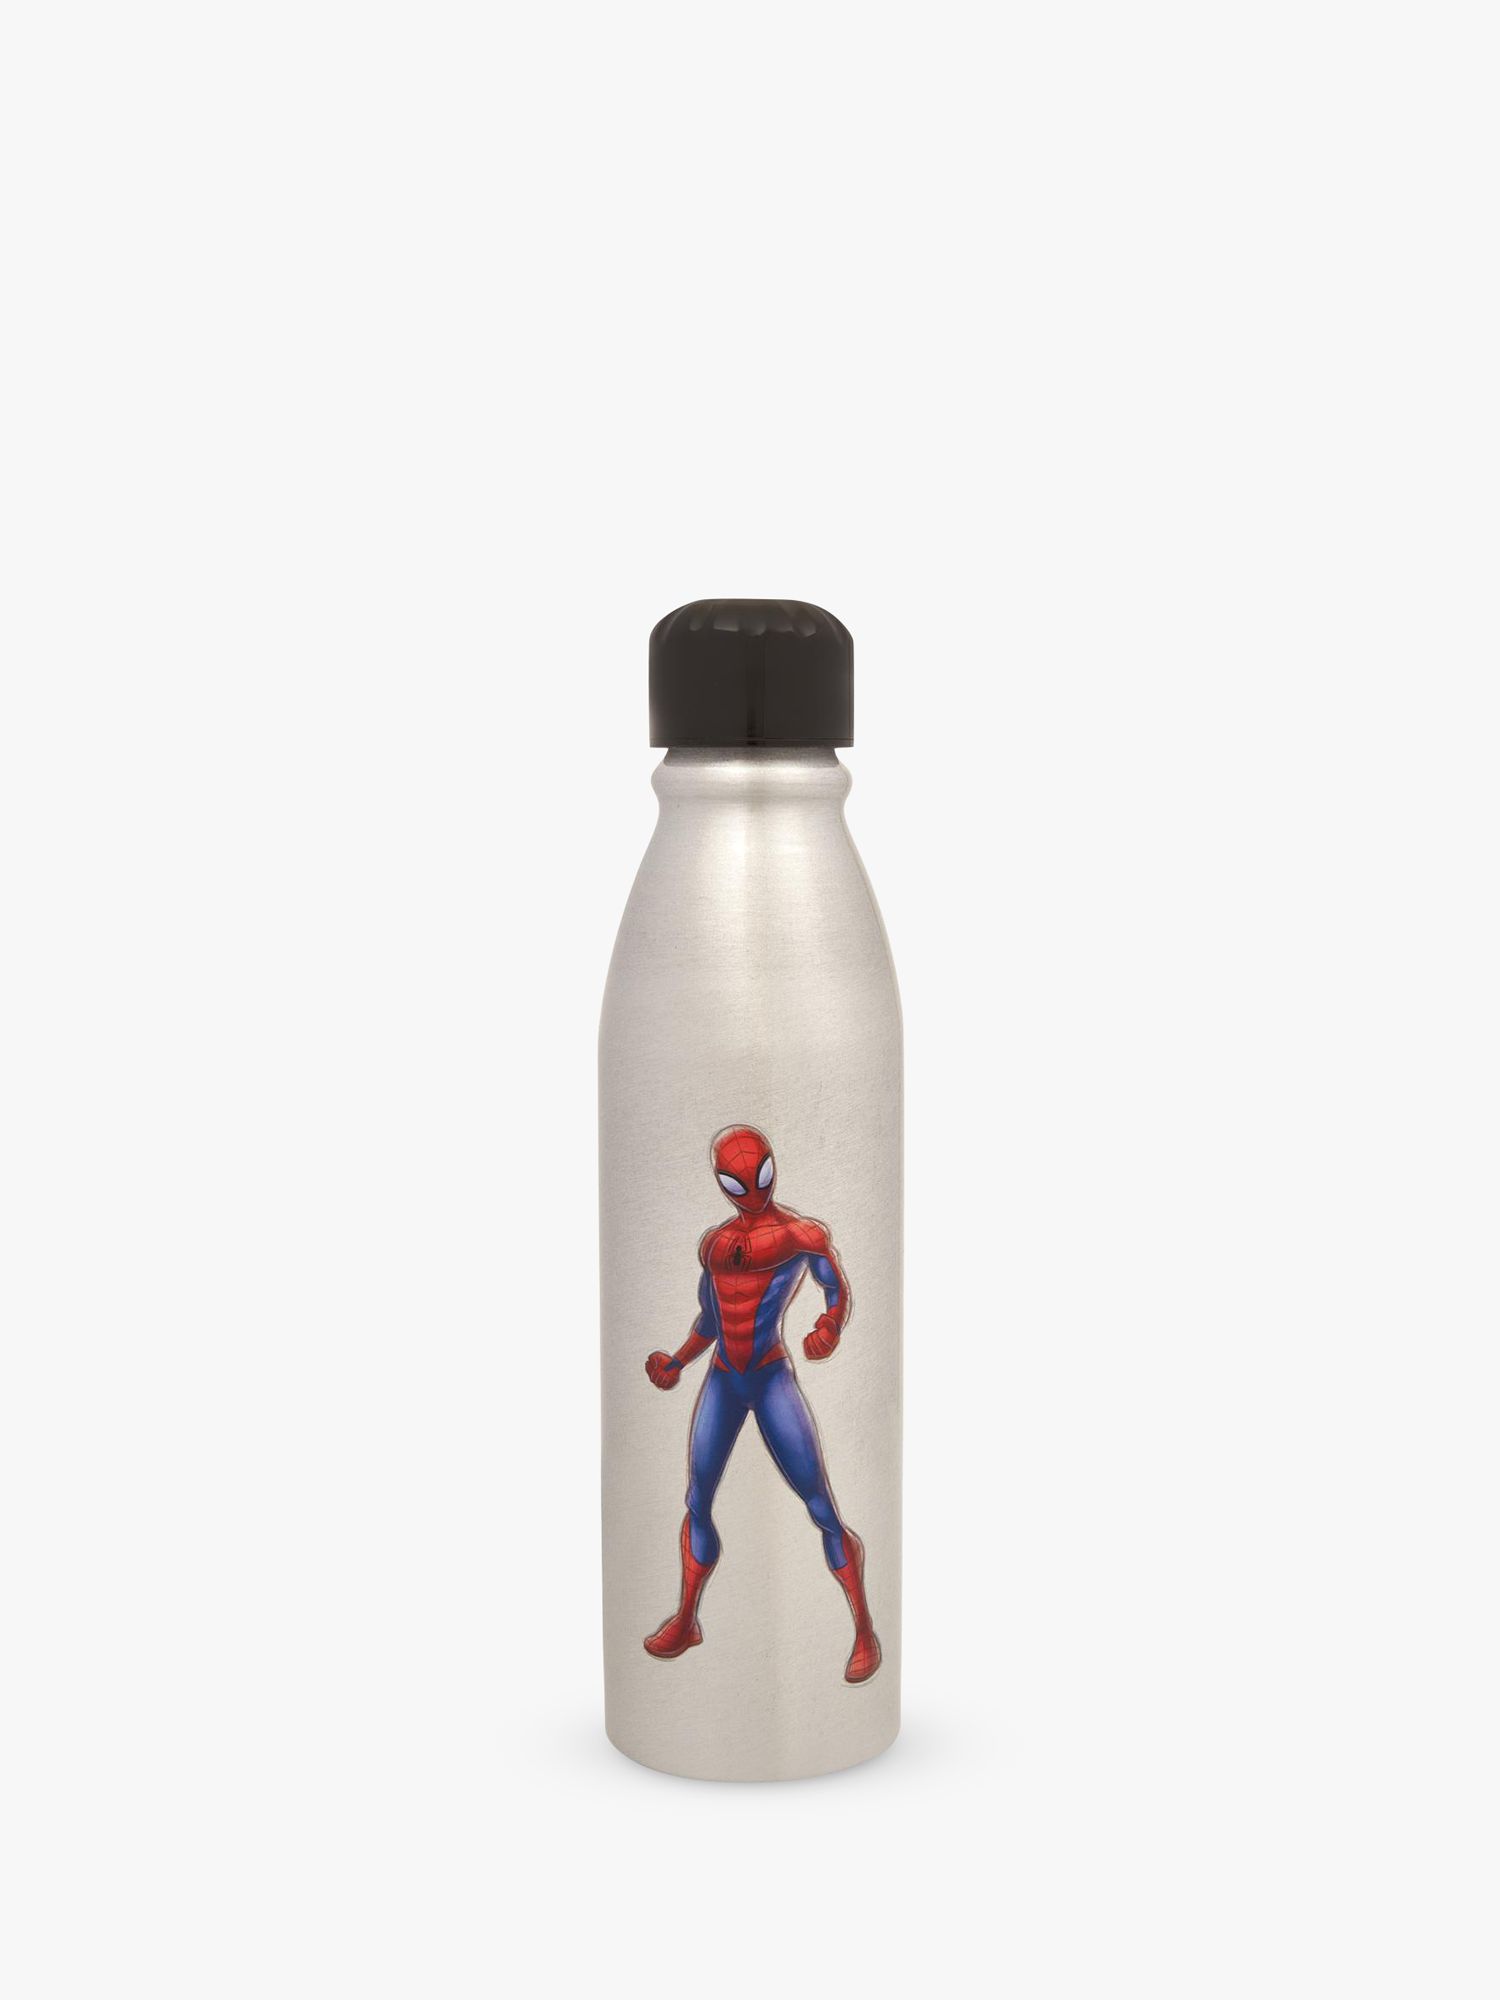 Exclusive Avengers 20 oz Insulated Stainless Steel Kids Water Bottle